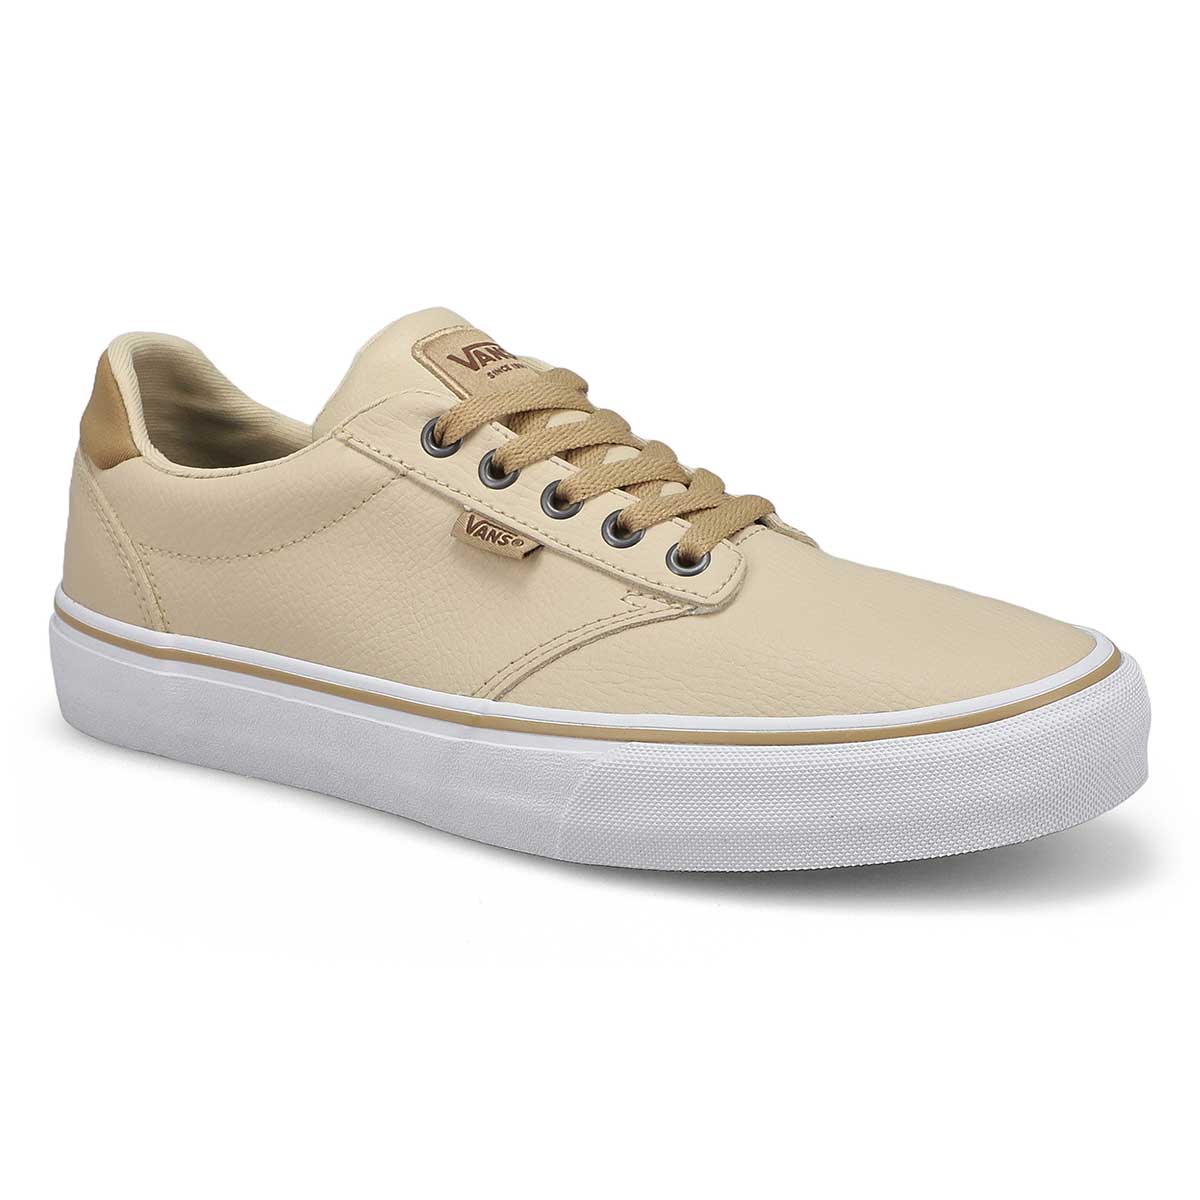 Mens Atwood Deluxe Sneaker - Taupe